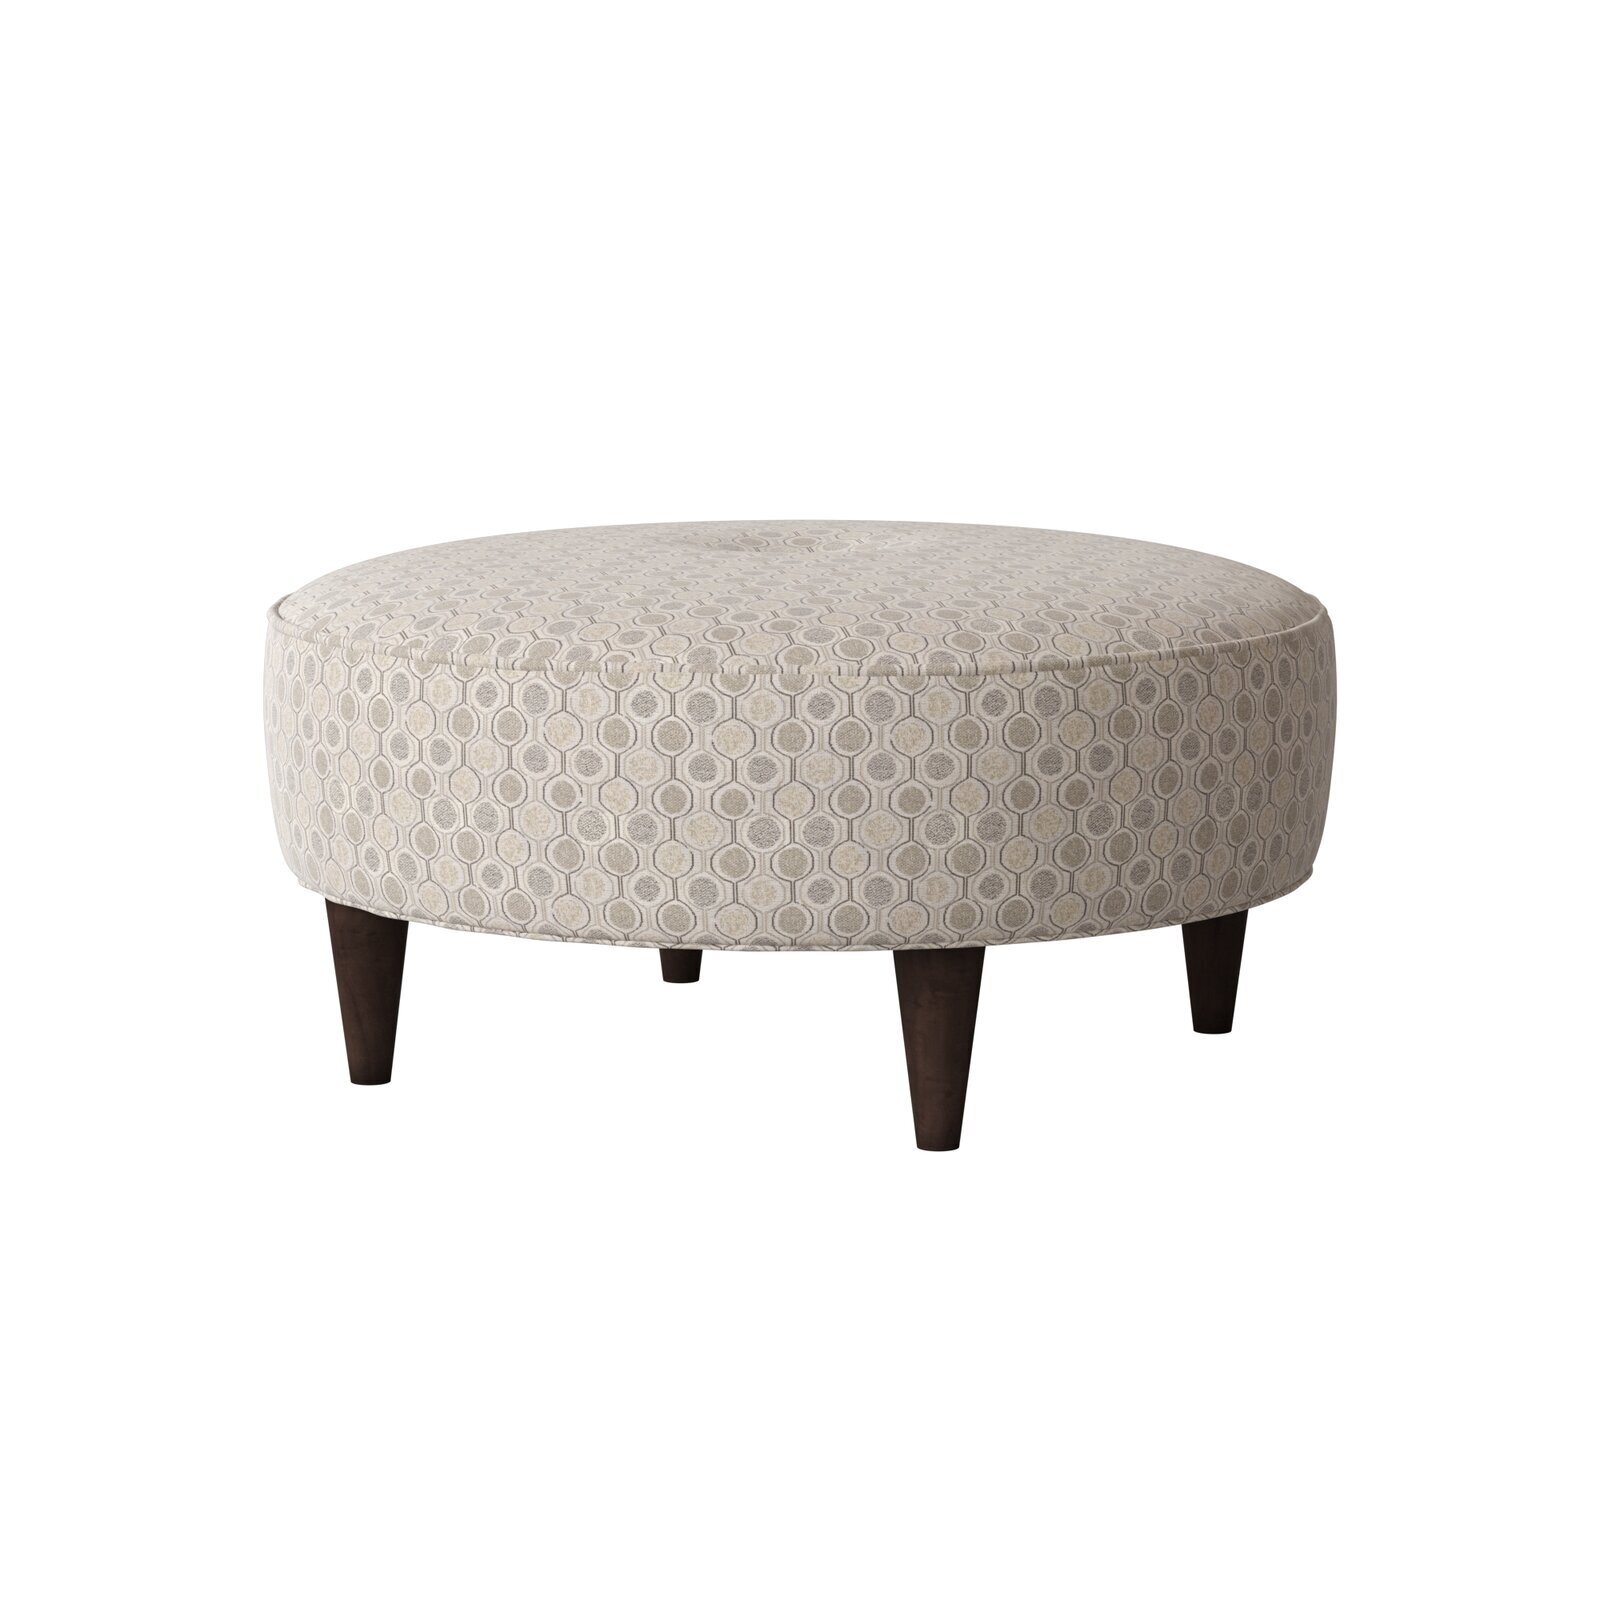 Patterned Round Fabric Coffee Table